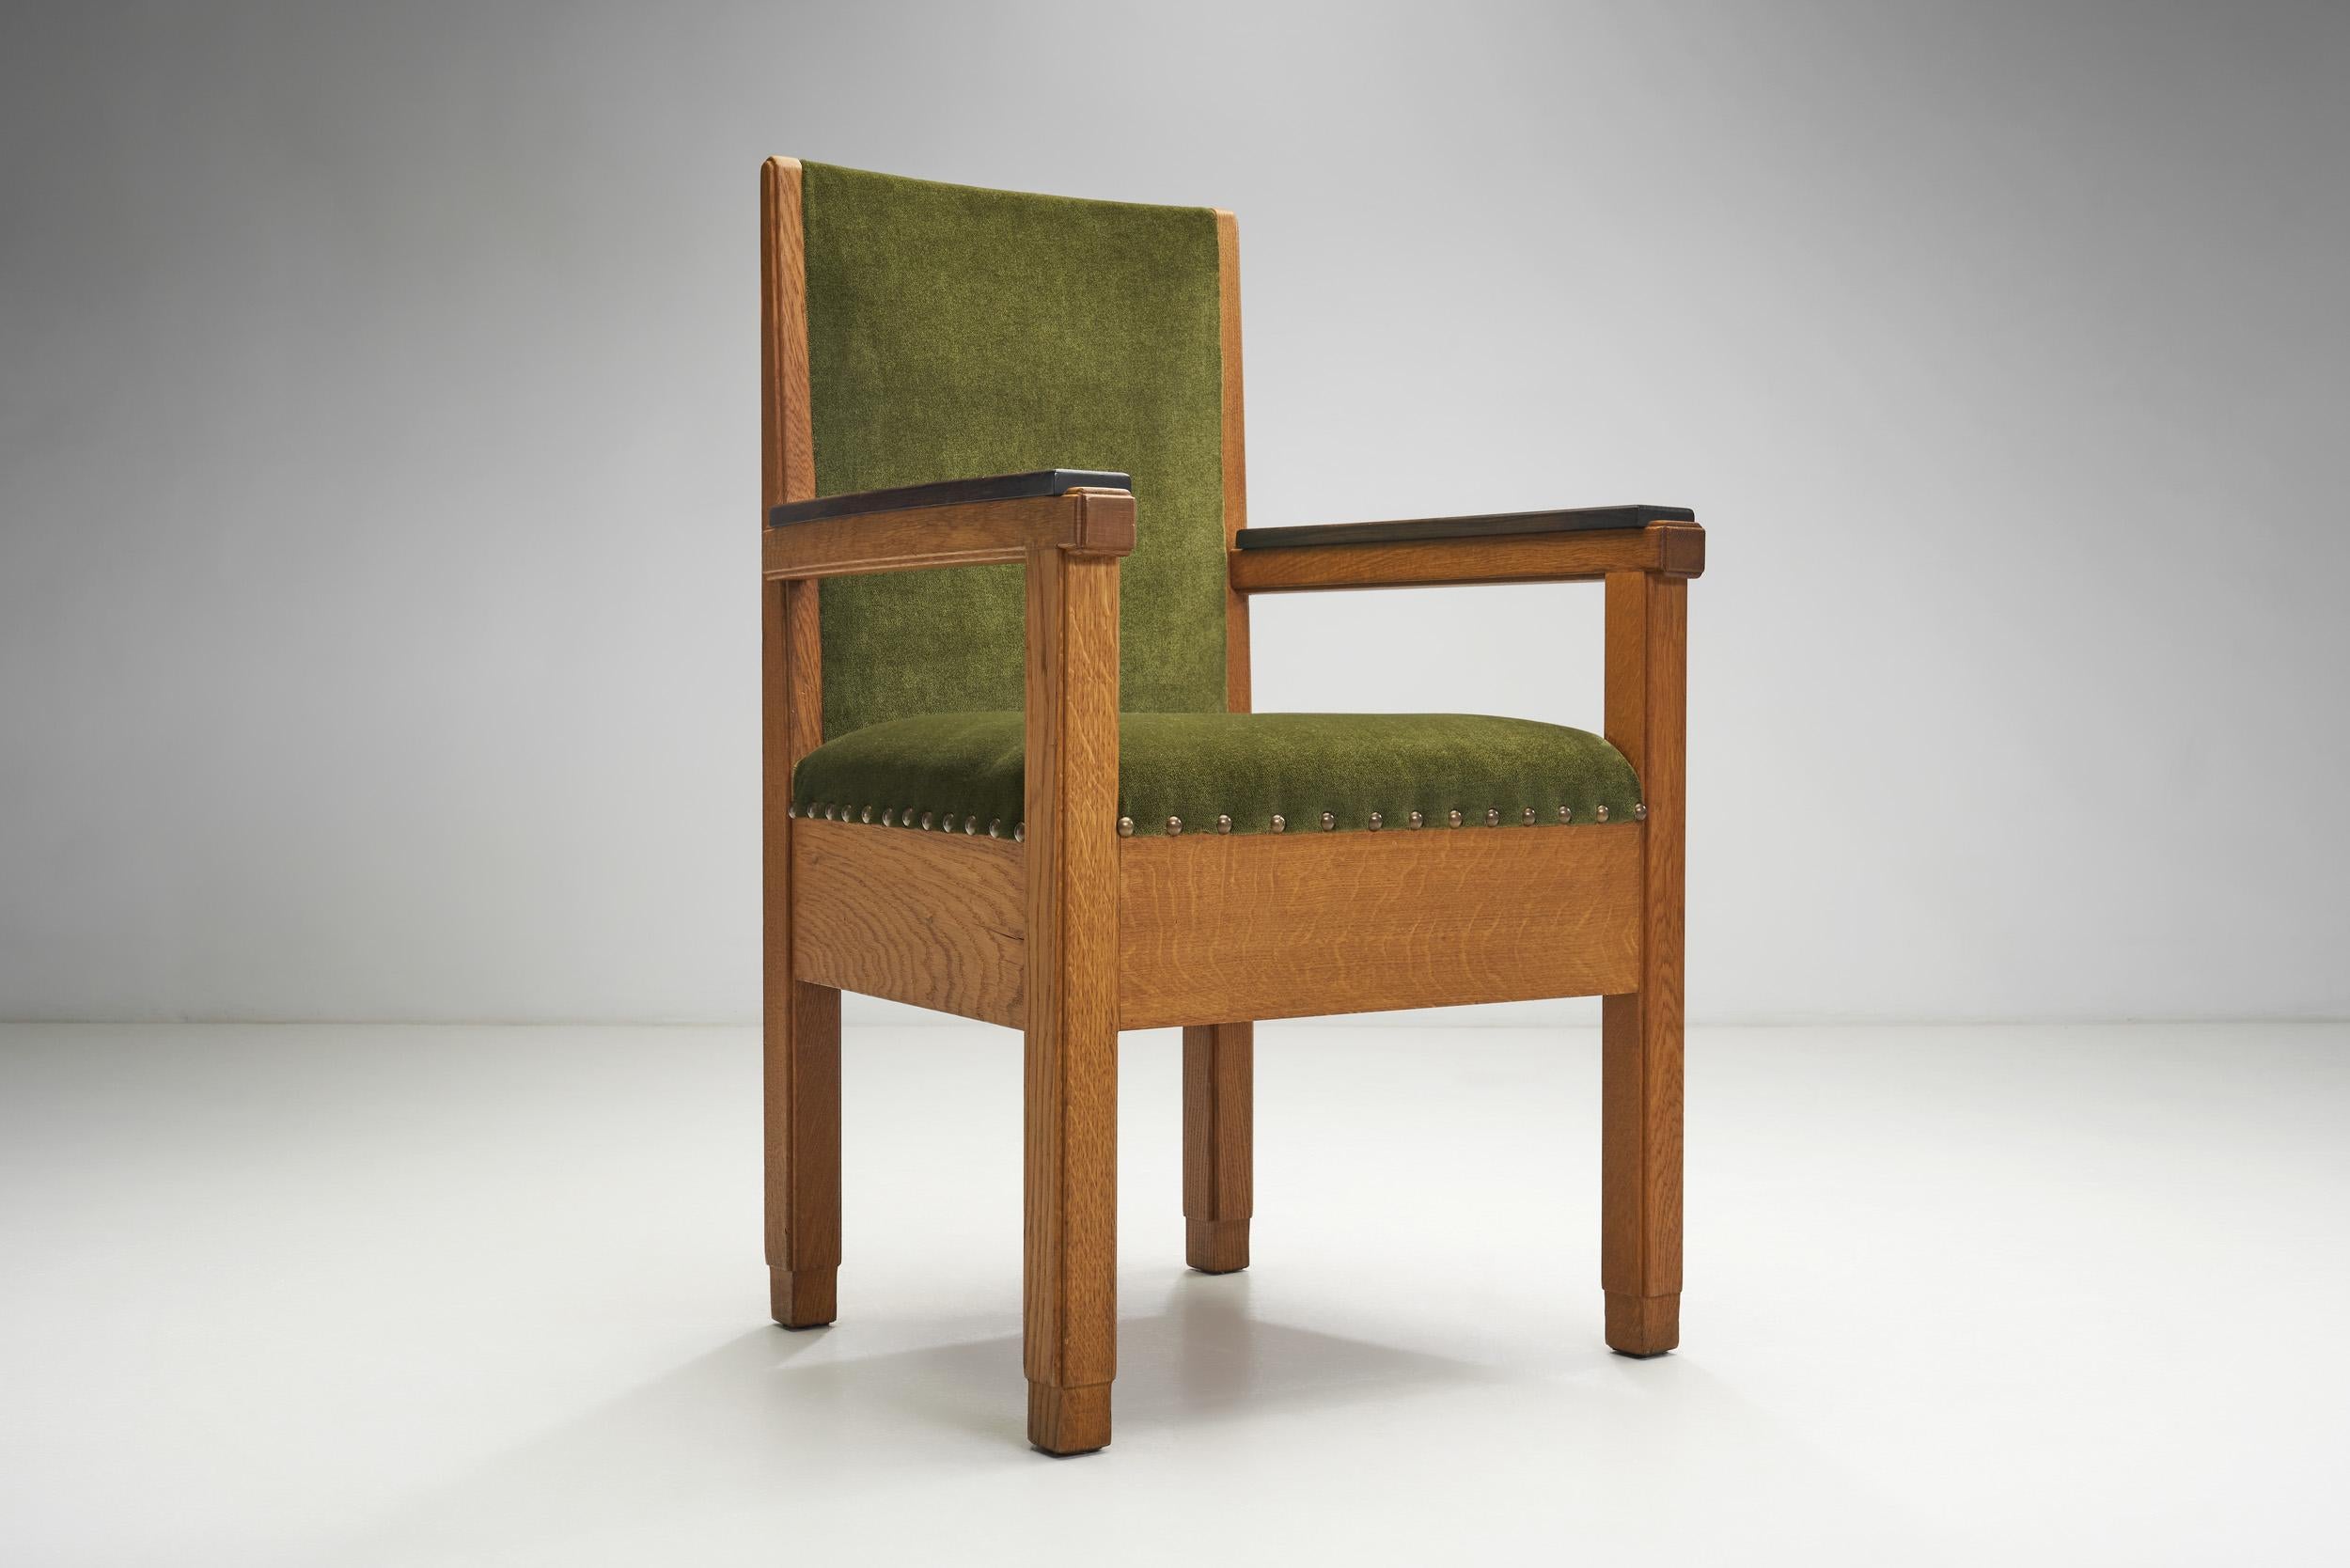 Upholstered Amsterdamse School Chairs, The Netherlands Early 20th Century For Sale 4